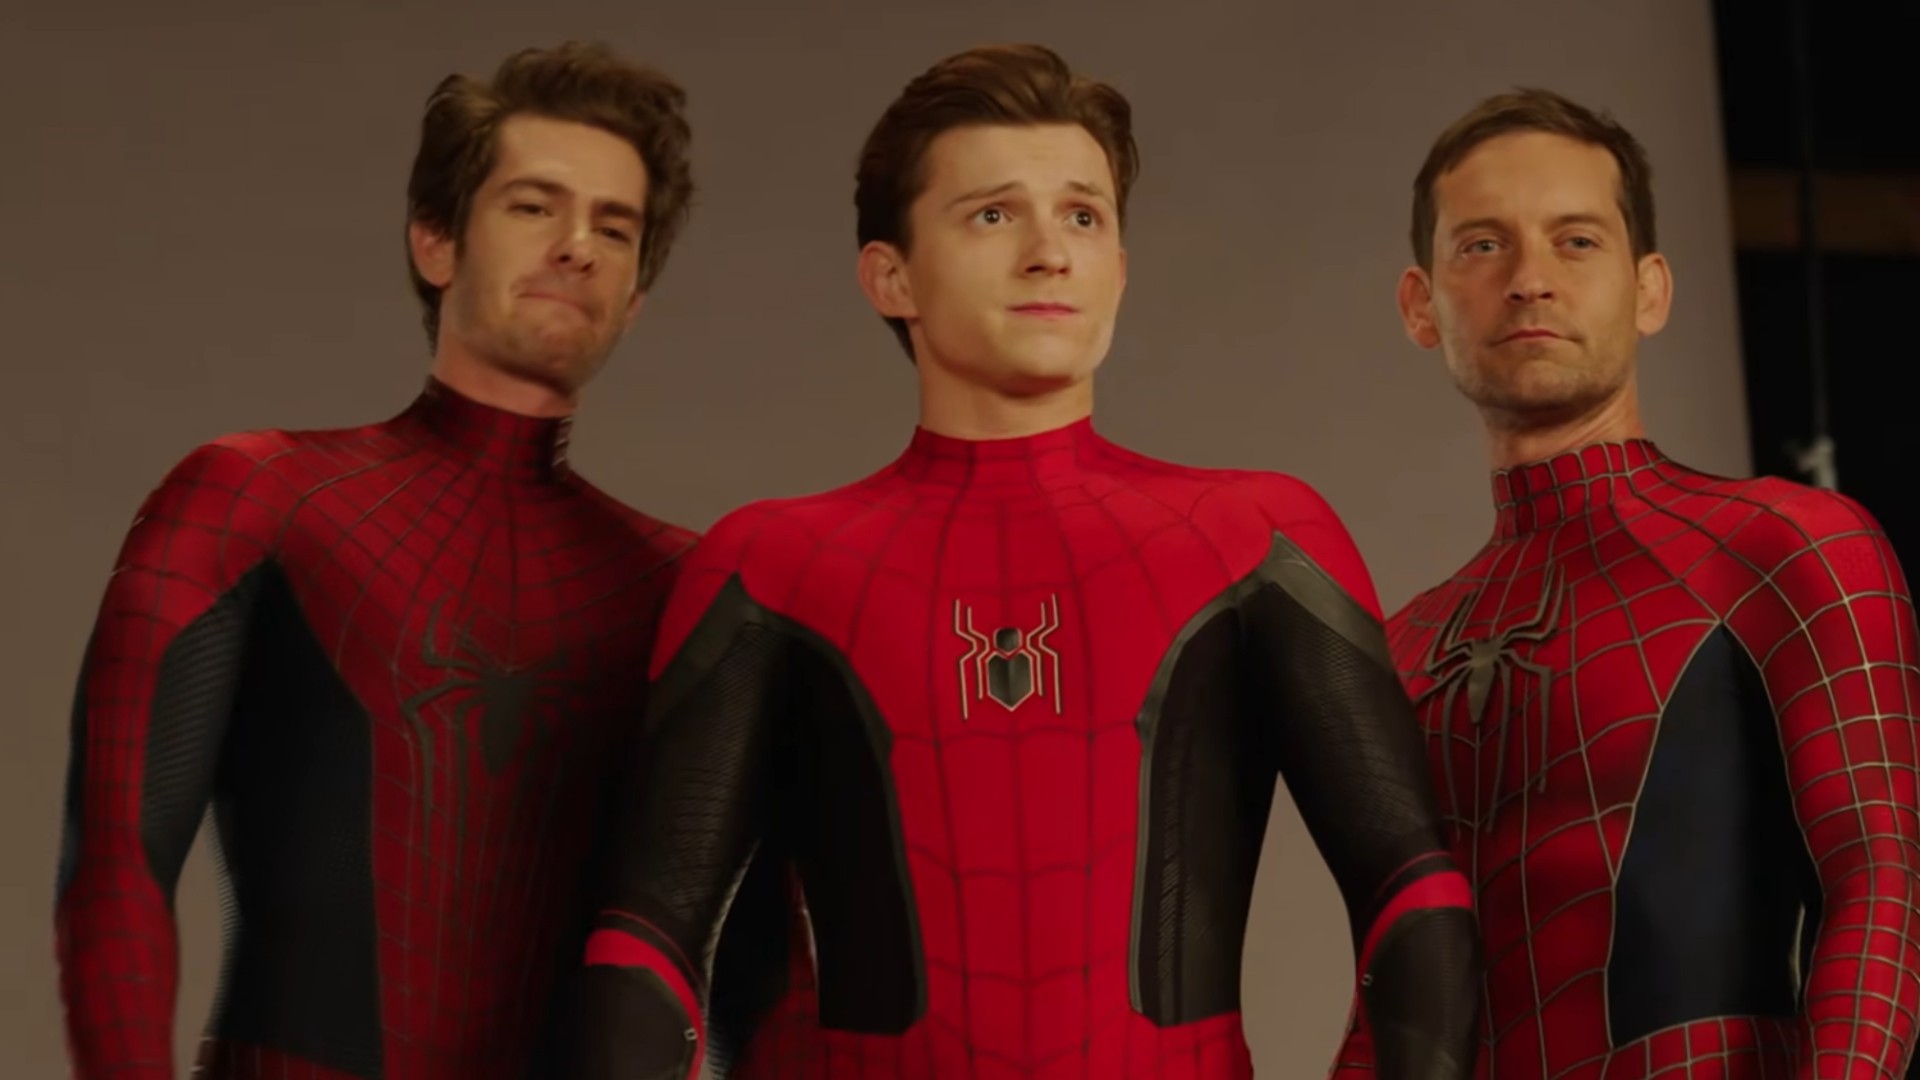 Tobey Maguire hints at his possible return as MCU Spider-Man in